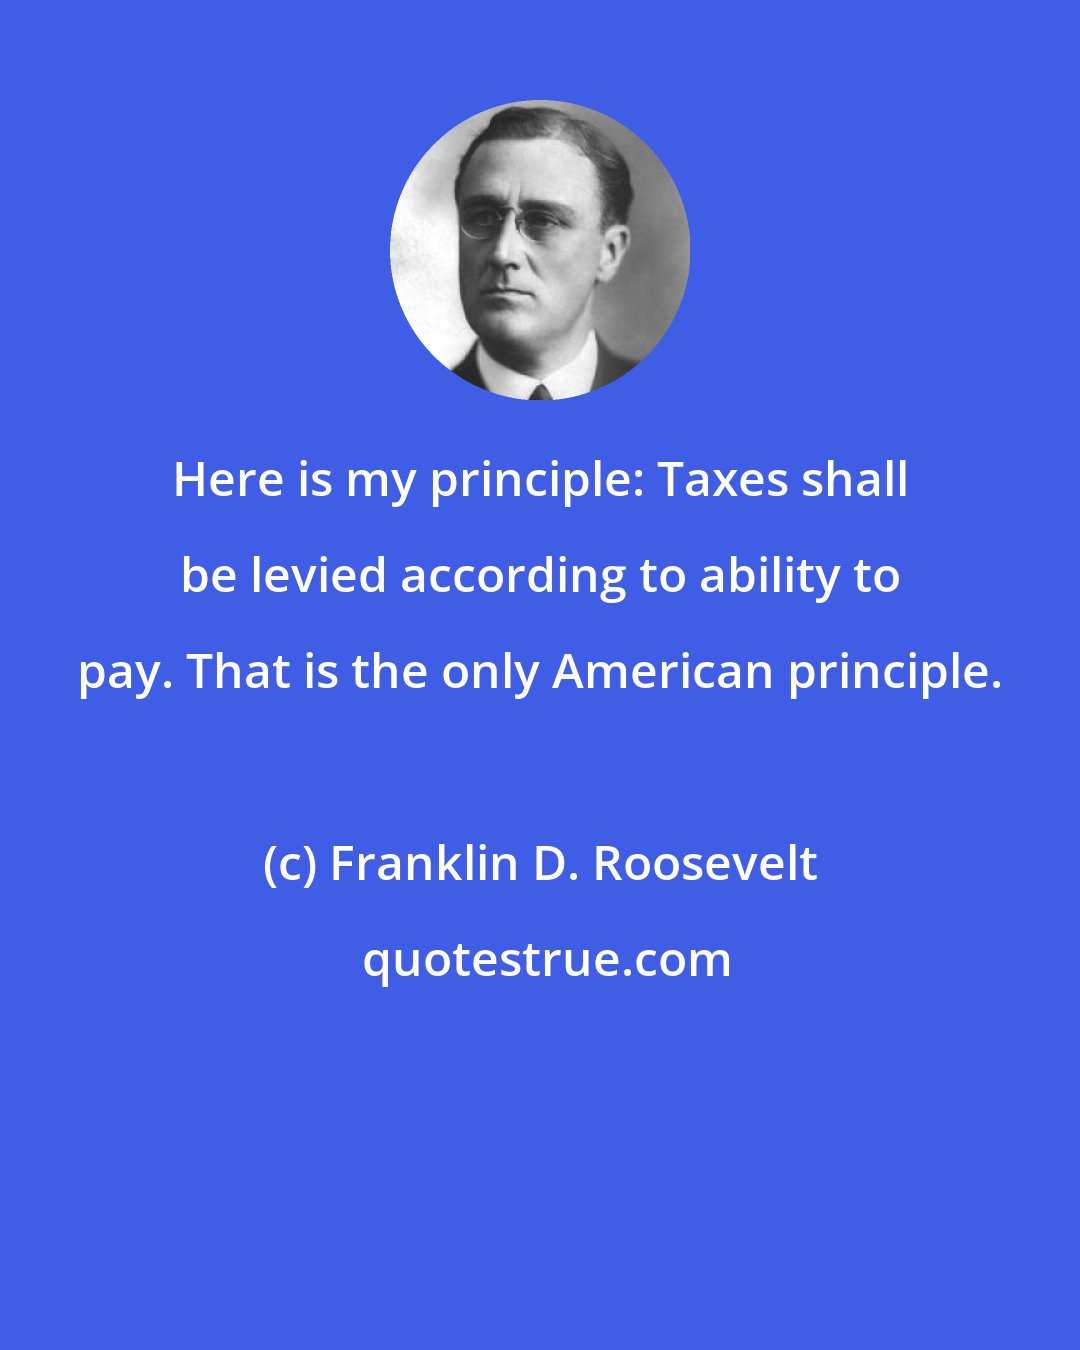 Franklin D. Roosevelt: Here is my principle: Taxes shall be levied according to ability to pay. That is the only American principle.